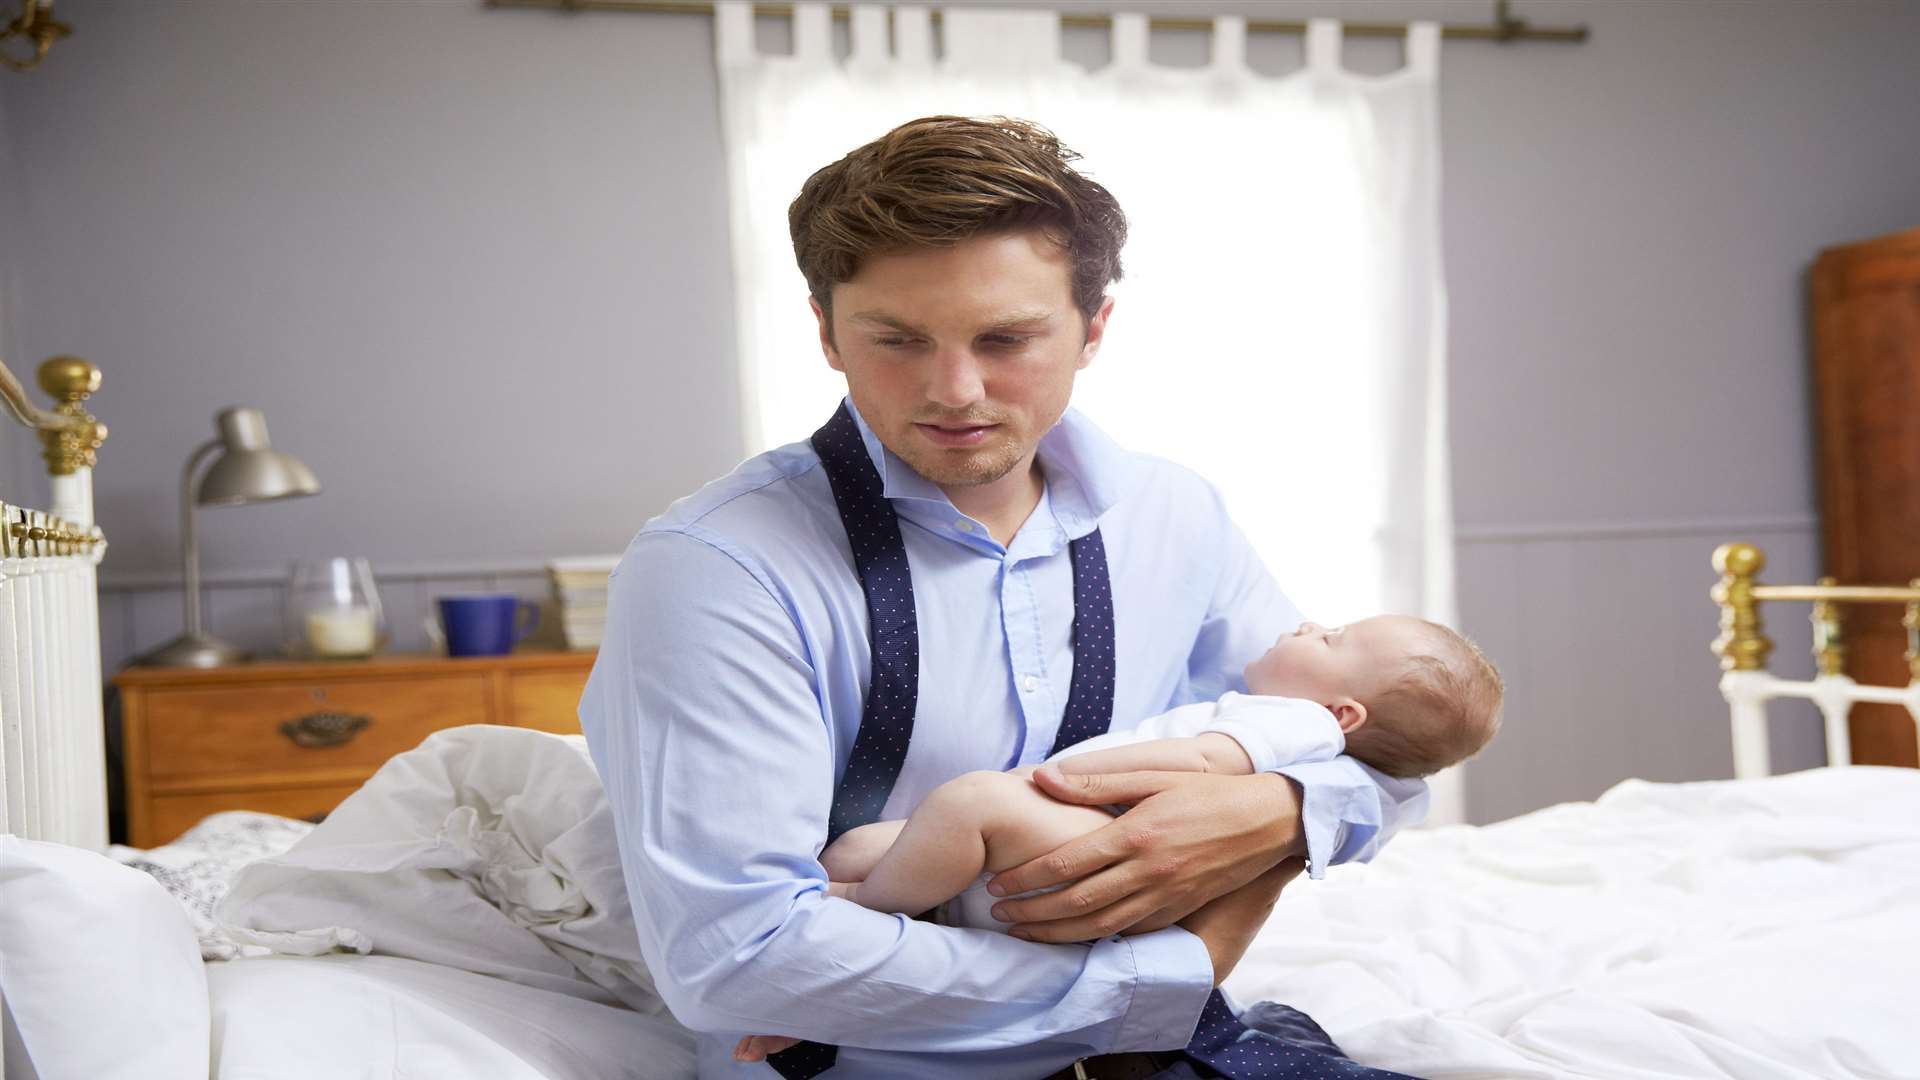 Postnatal depression can affect both mothers and fathers